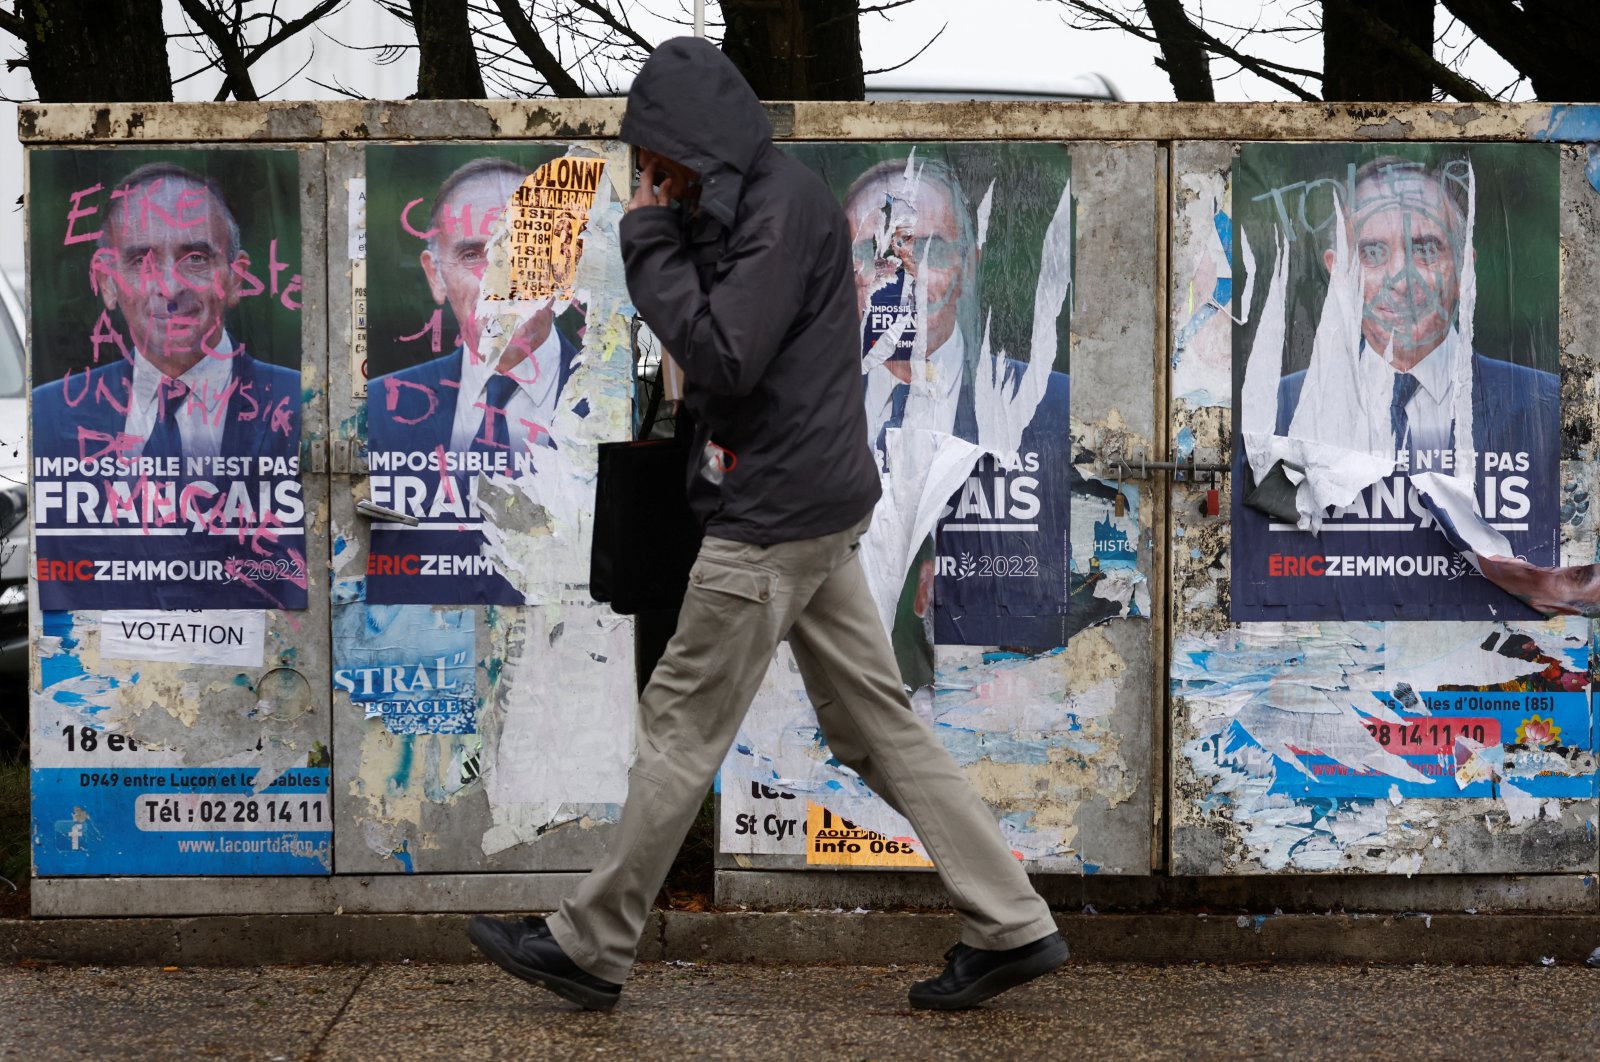 A man walks past torn campaign posters in support of Eric Zemmour, French commentator, leader of far-right party &quot;Reconquete&quot; and candidate for the 2022 French presidential election, in Les Sables d&#039;Olonne, France, Feb. 16, 2022. (REUTERS Photo)